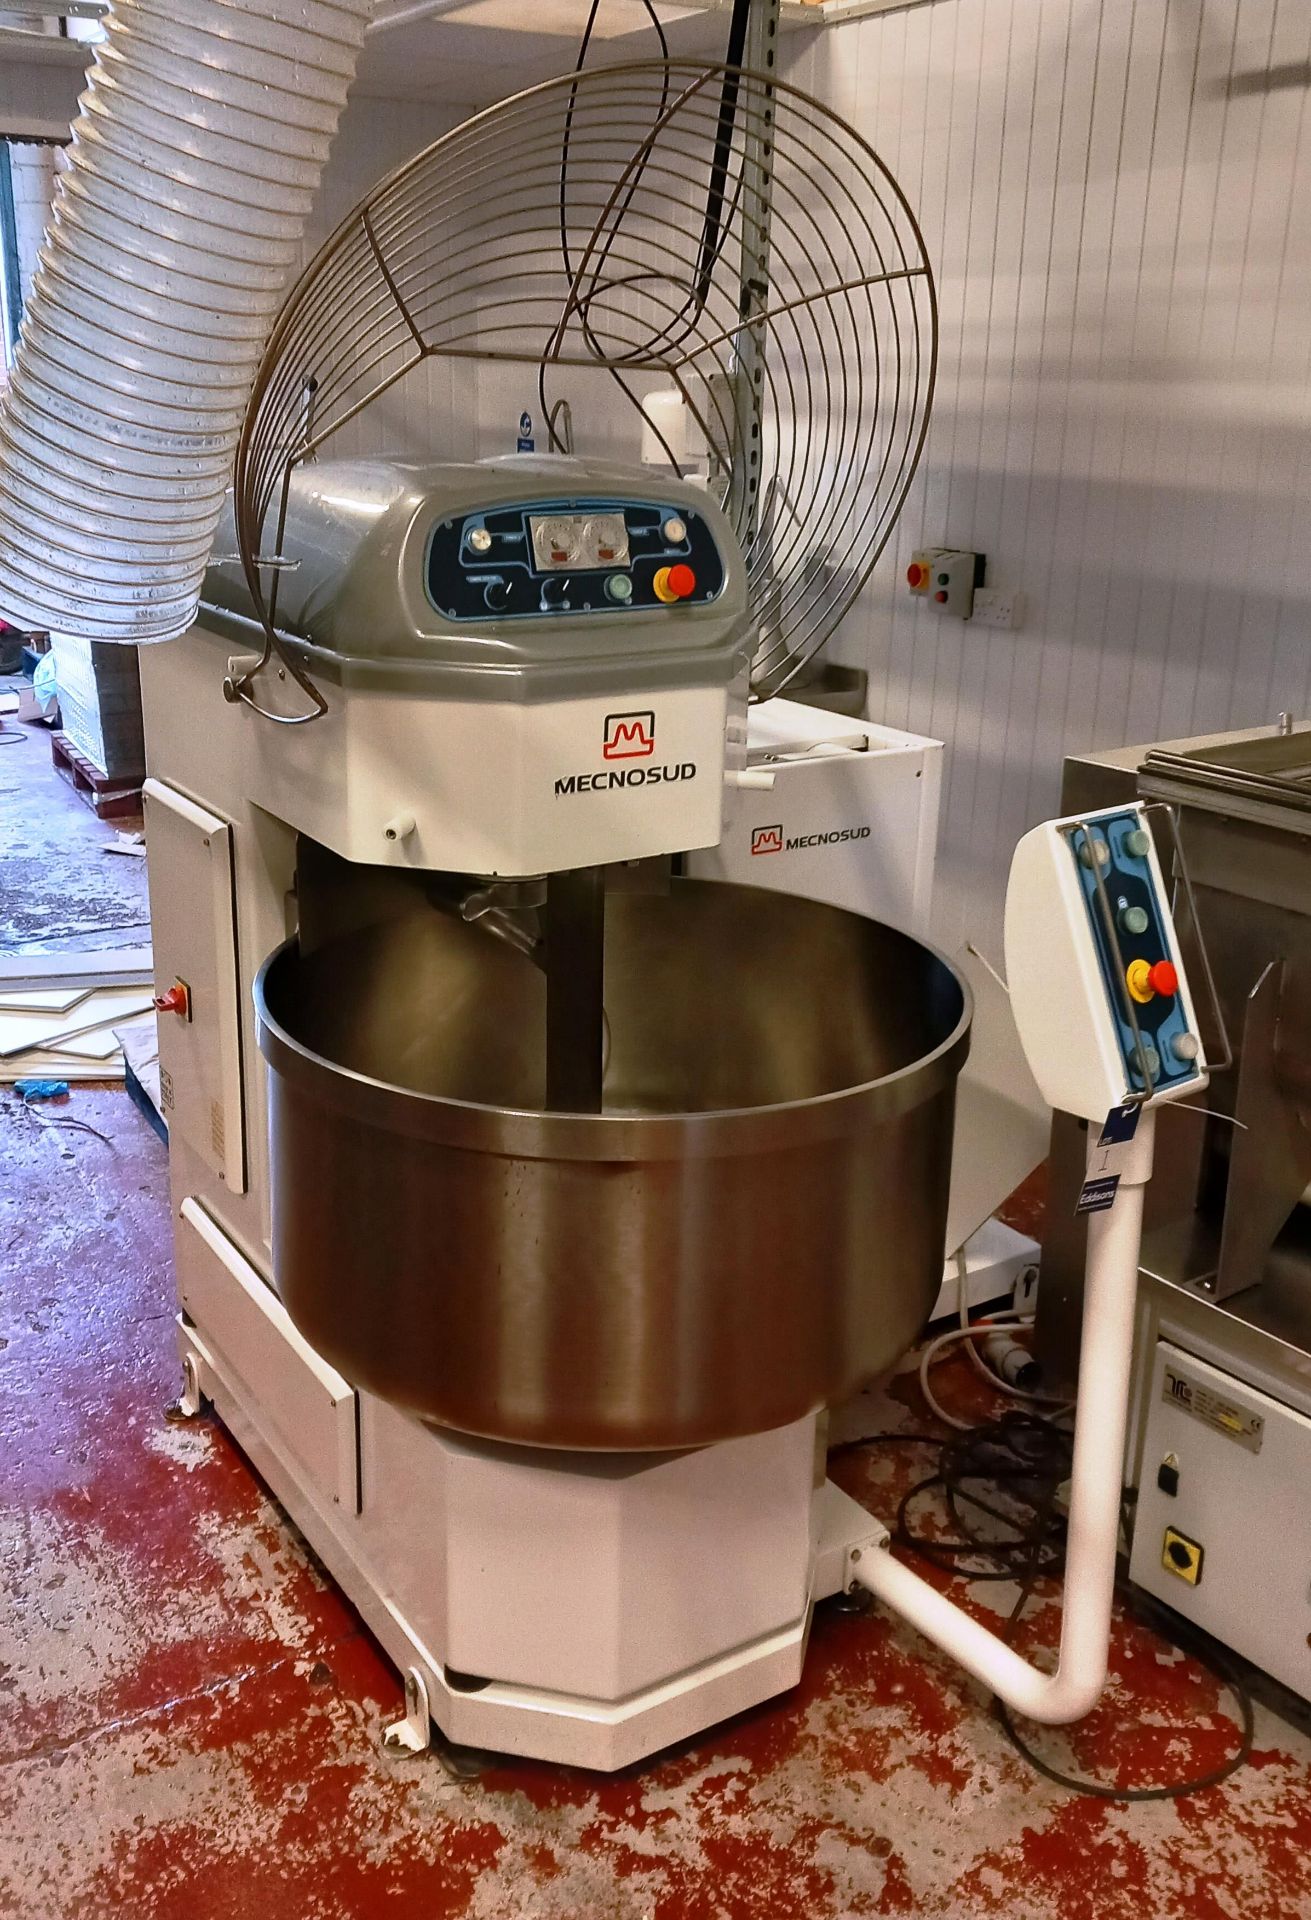 Mecnosud SPRB200 Auto Tipping 200 ltr Spiral Mixer (2015) 3 Phase